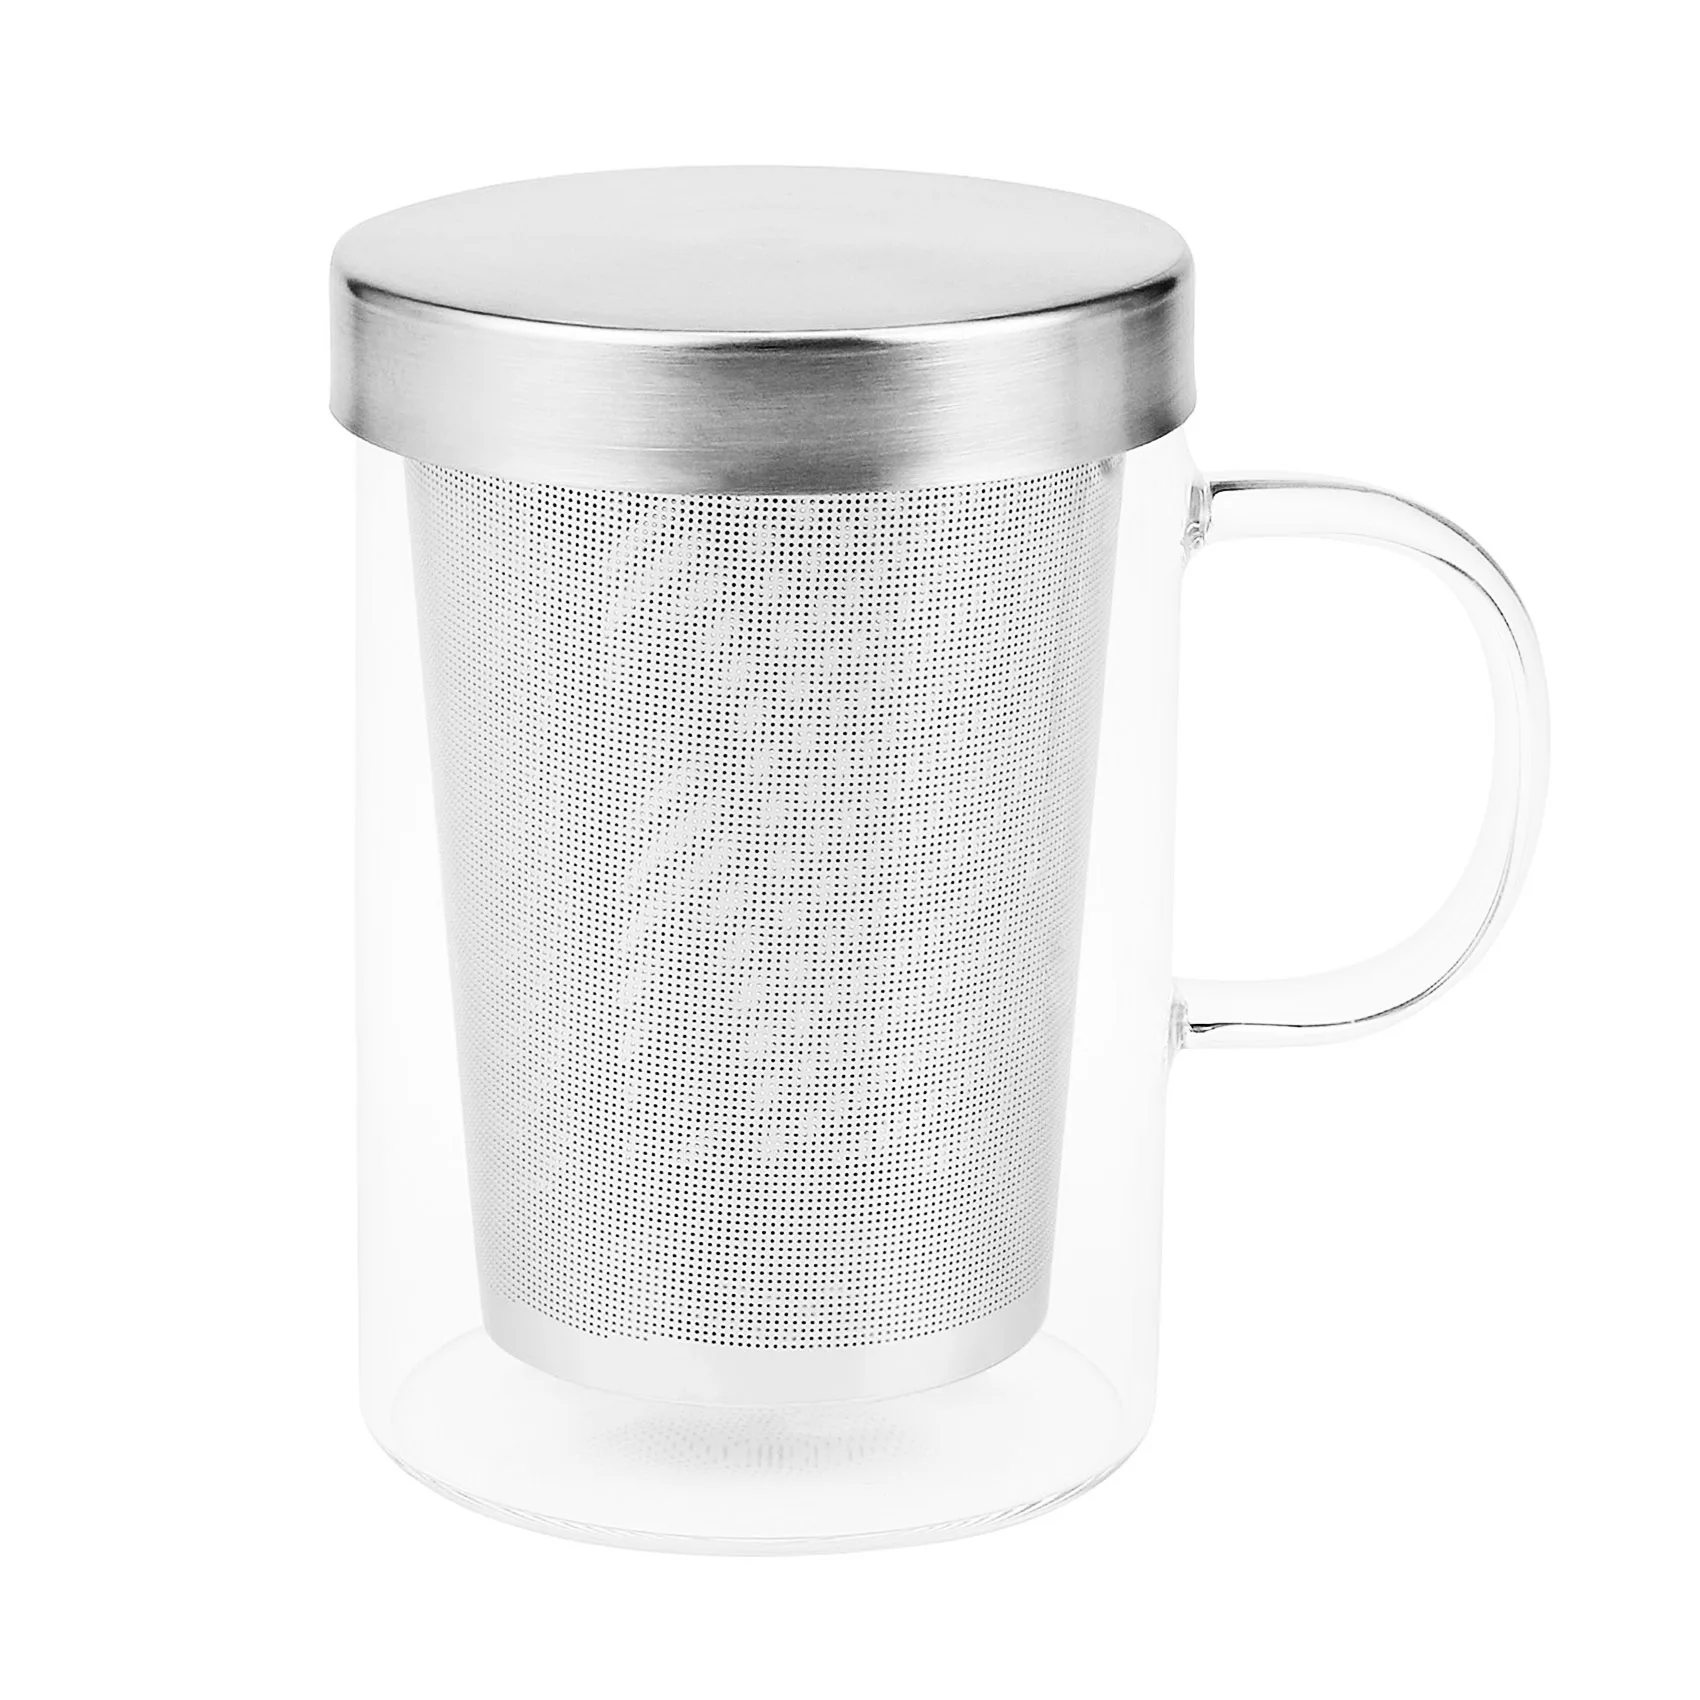 

500Ml Travel Heat-Resistant Glass Tea Infuser Mug with Stainless Steel Lid Coffee Cup Tumbler Kitchen Heat-Resistant Large